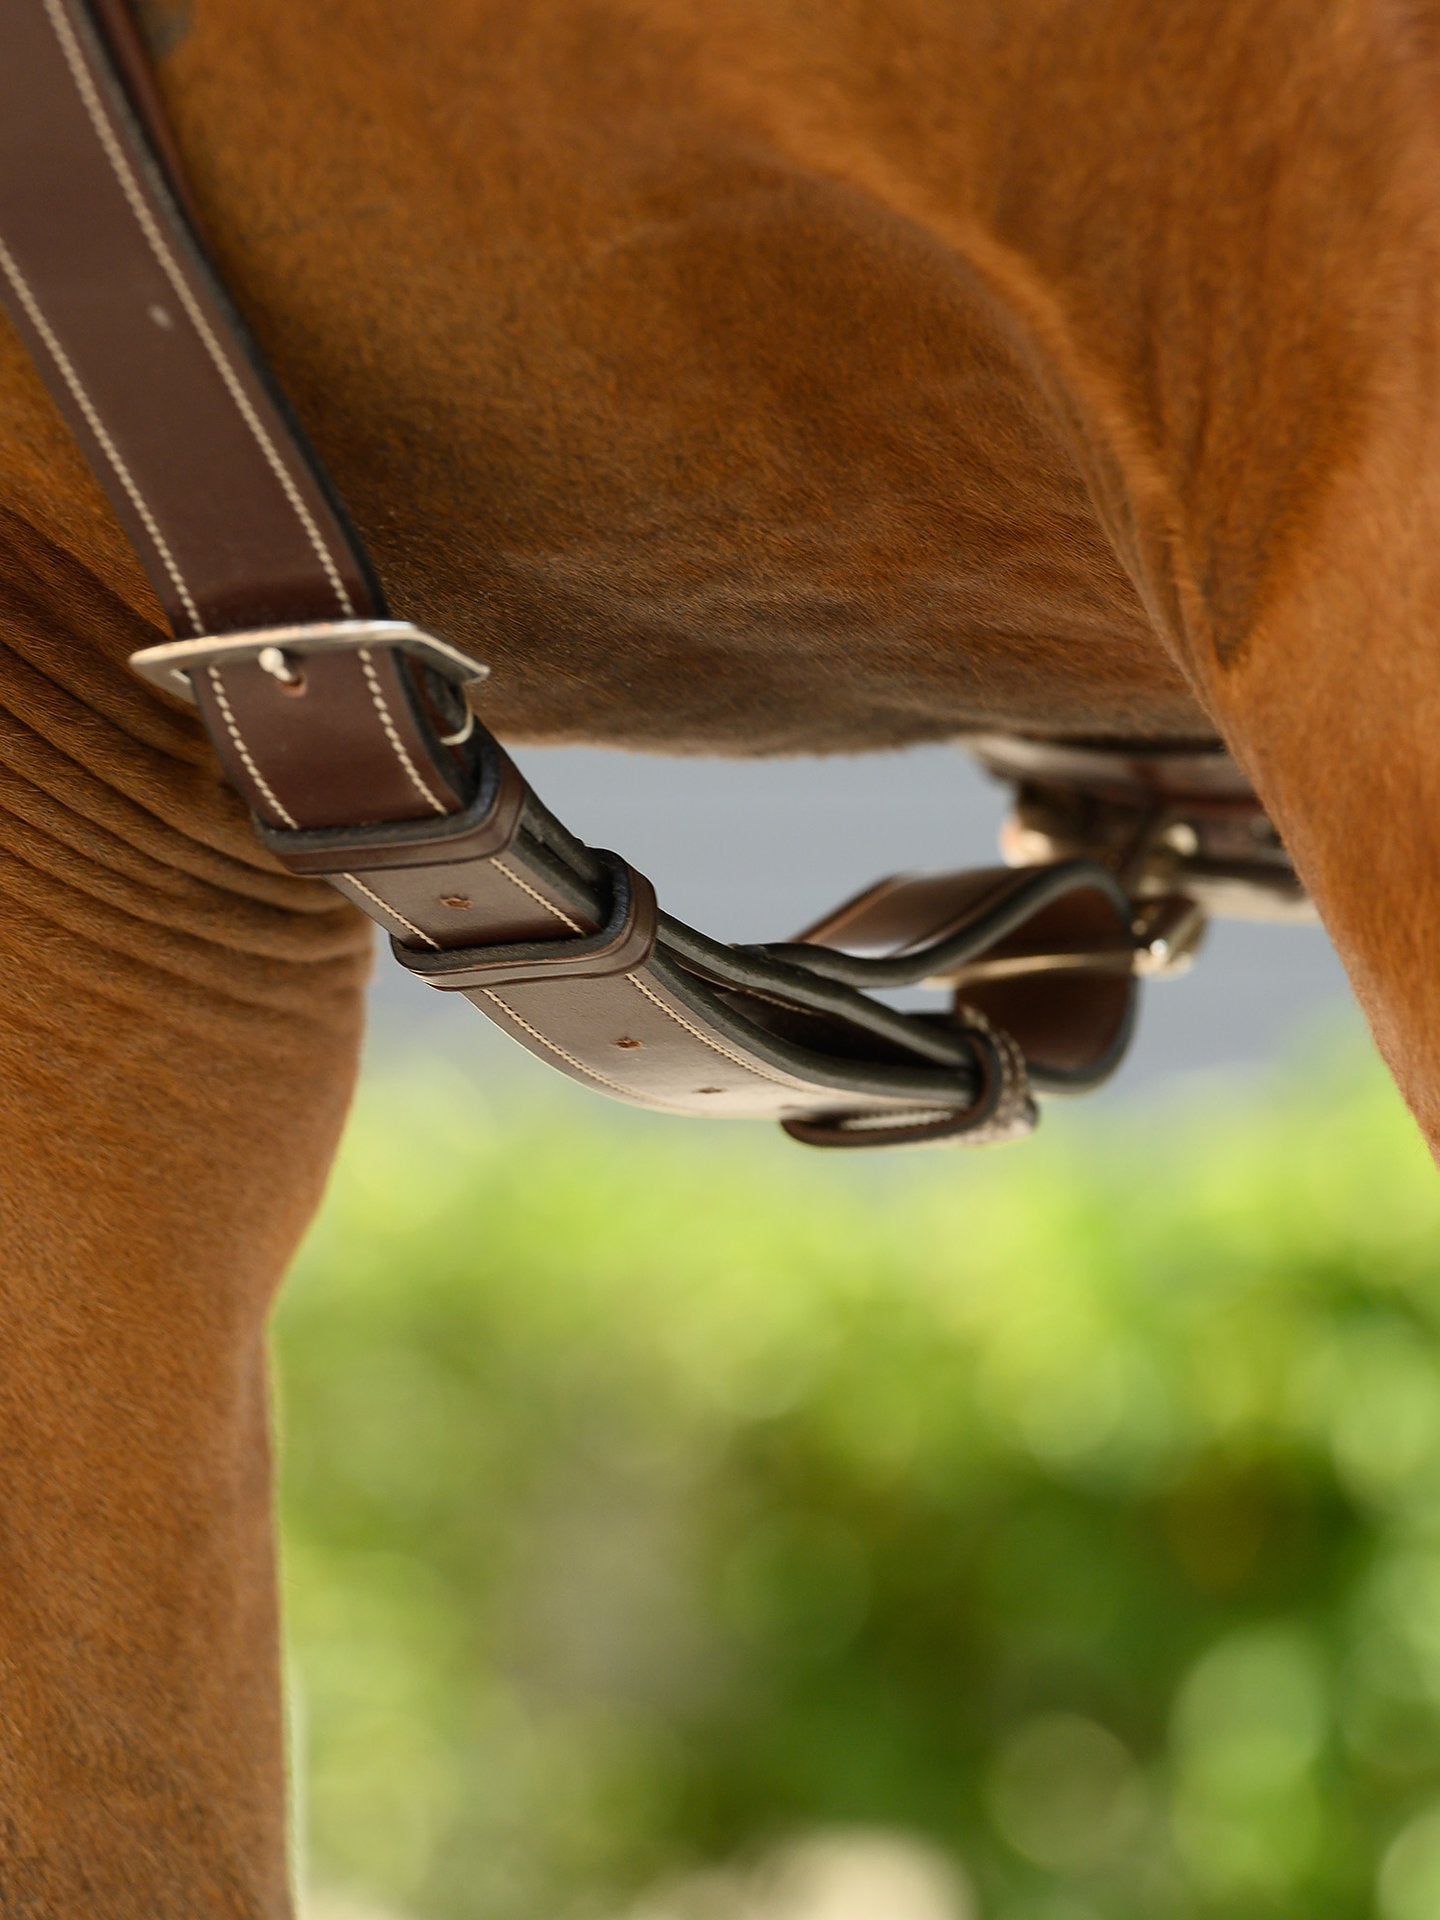 A luxurious and well-worked breastplate, extra wide and padded for additional comfort. It has an anatomically shaped curve to smoothly round the horse's shoulder without limiting the movability.